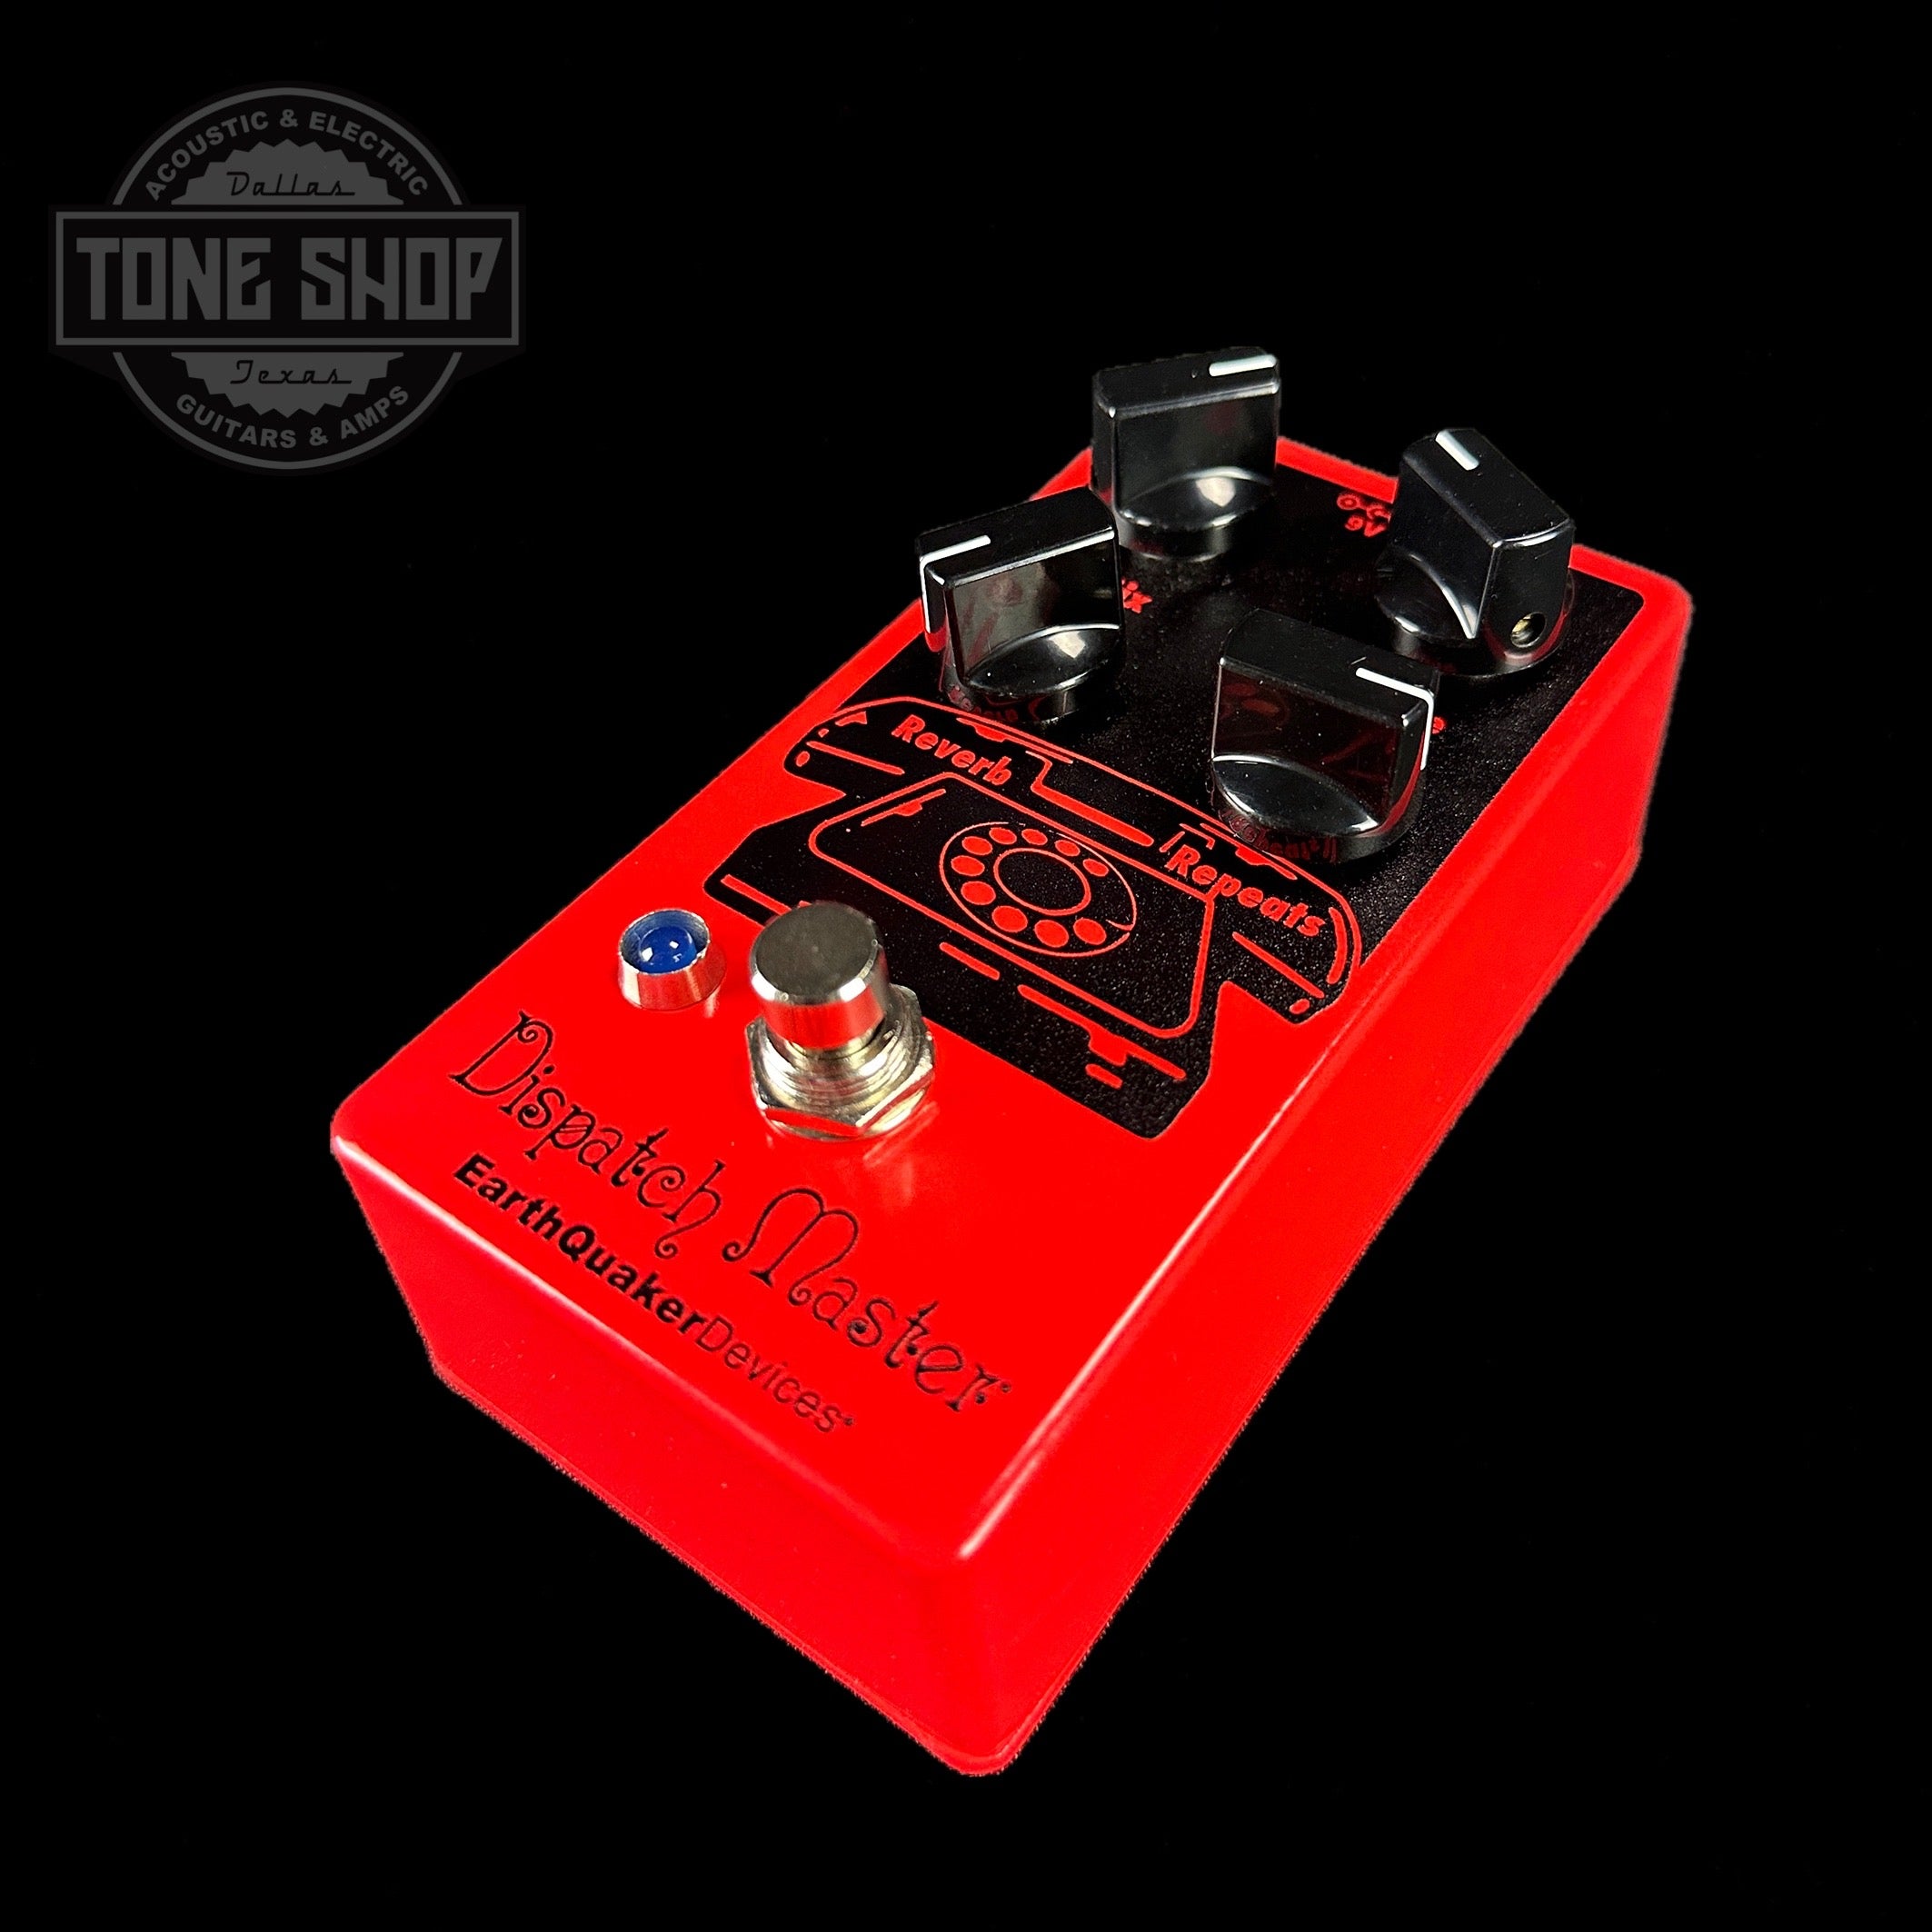 EarthQuaker Devices Dispatch Master V3 Tone Shop Custom Candy Apple Red